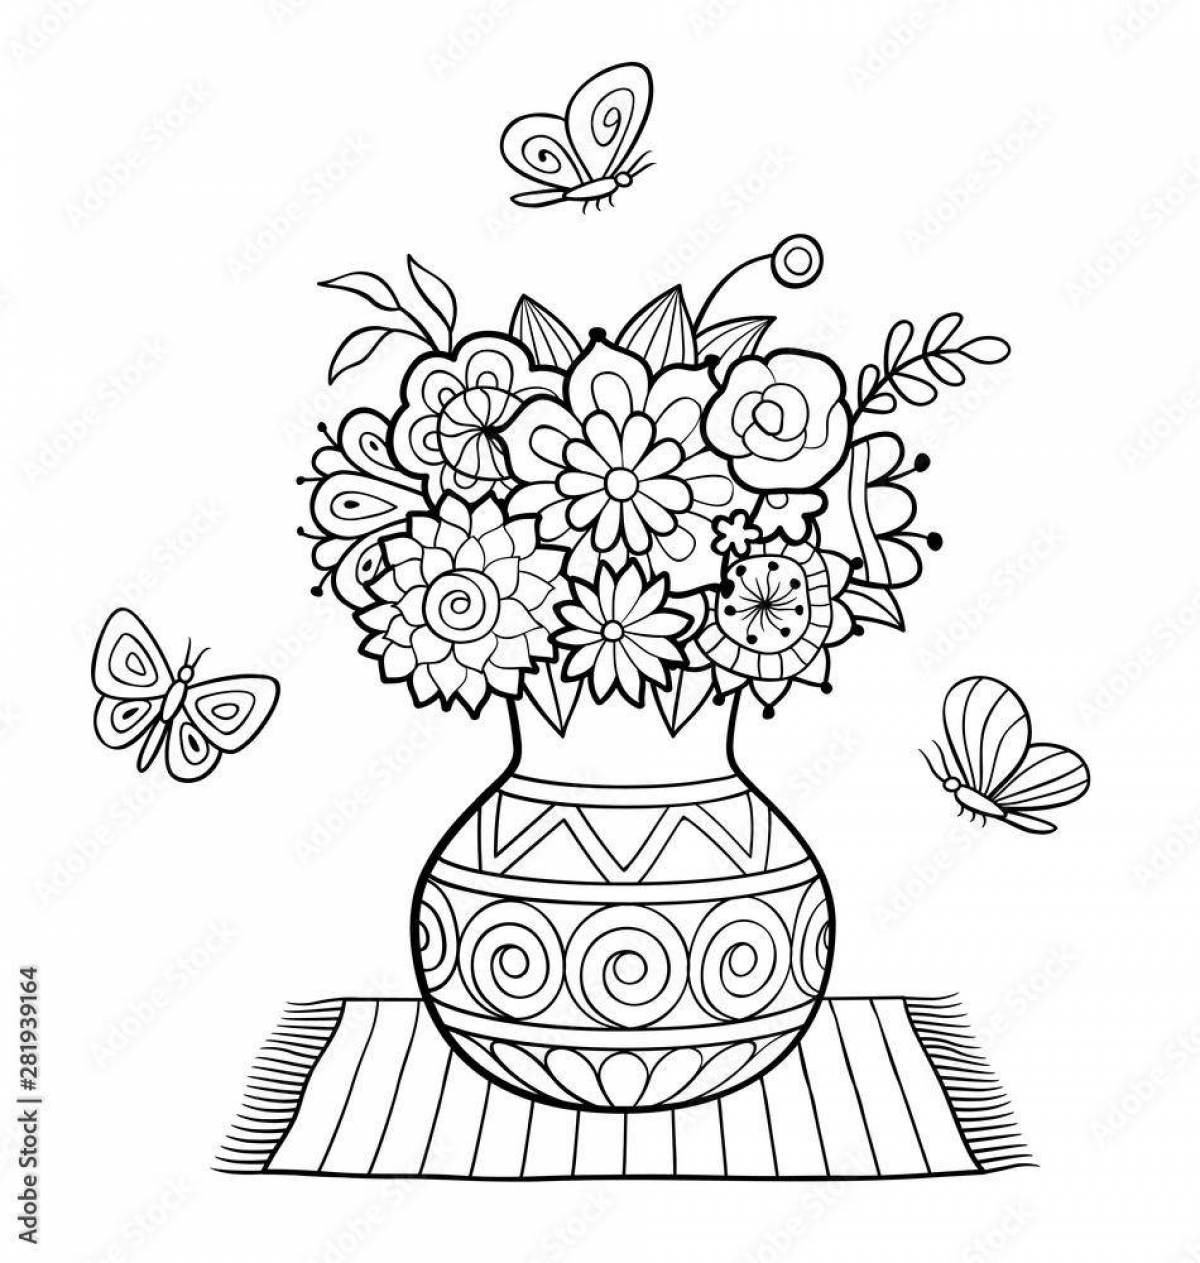 Fantastic vase with flowers coloring book for children 5-6 years old